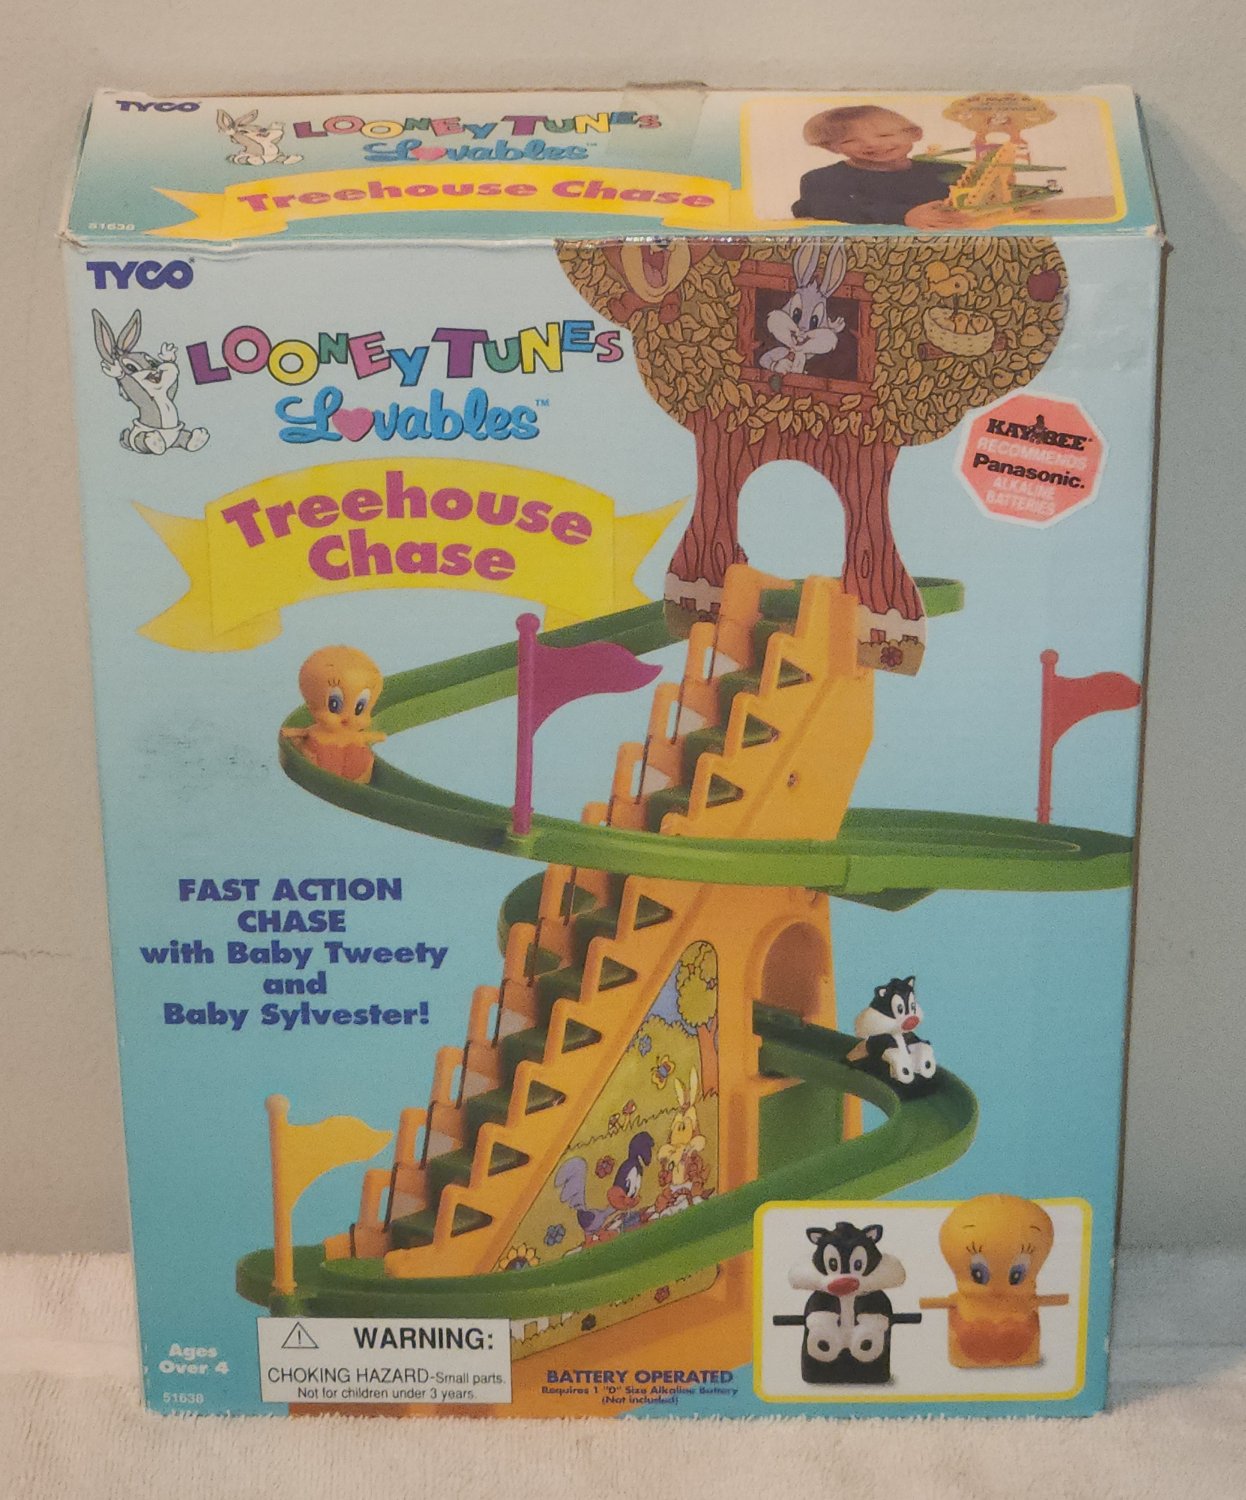 Looney Tunes Lovables Treehouse Chase Playset Baby Tweety Sylvester Tyco 51638  Complete Works 1995